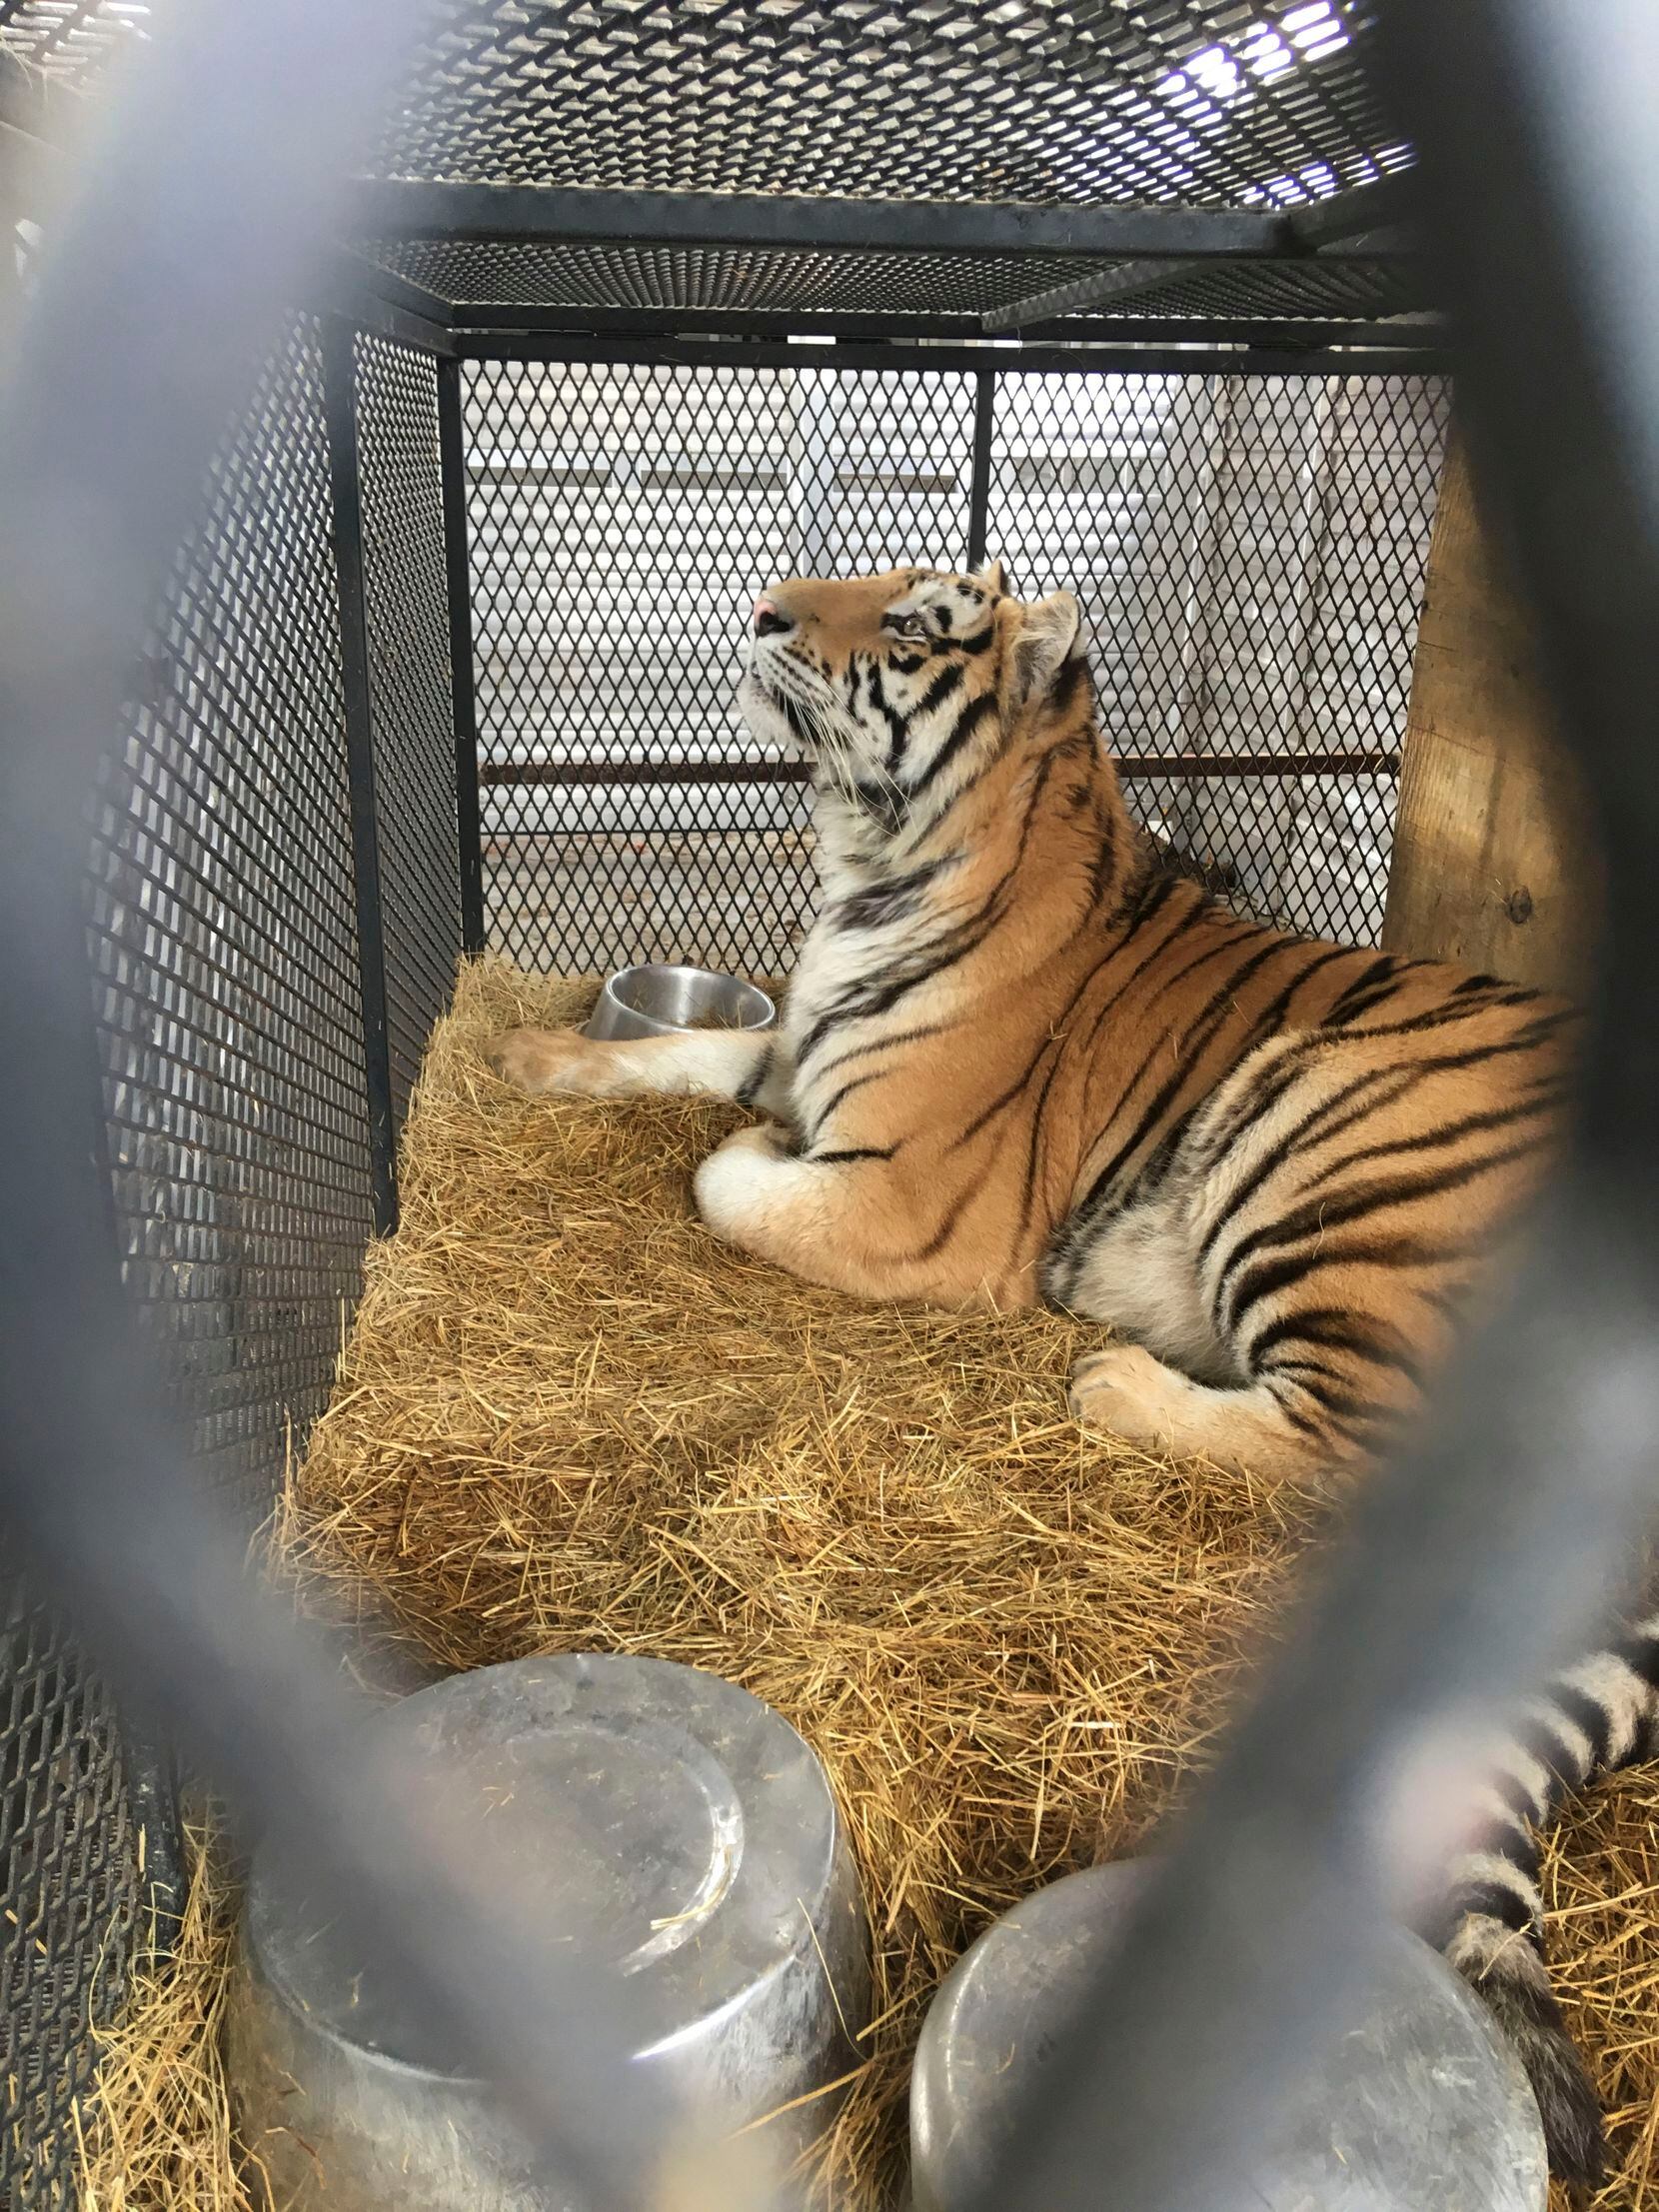 Tiger found in cage at Houston home is headed to East Texas animal sanctuary